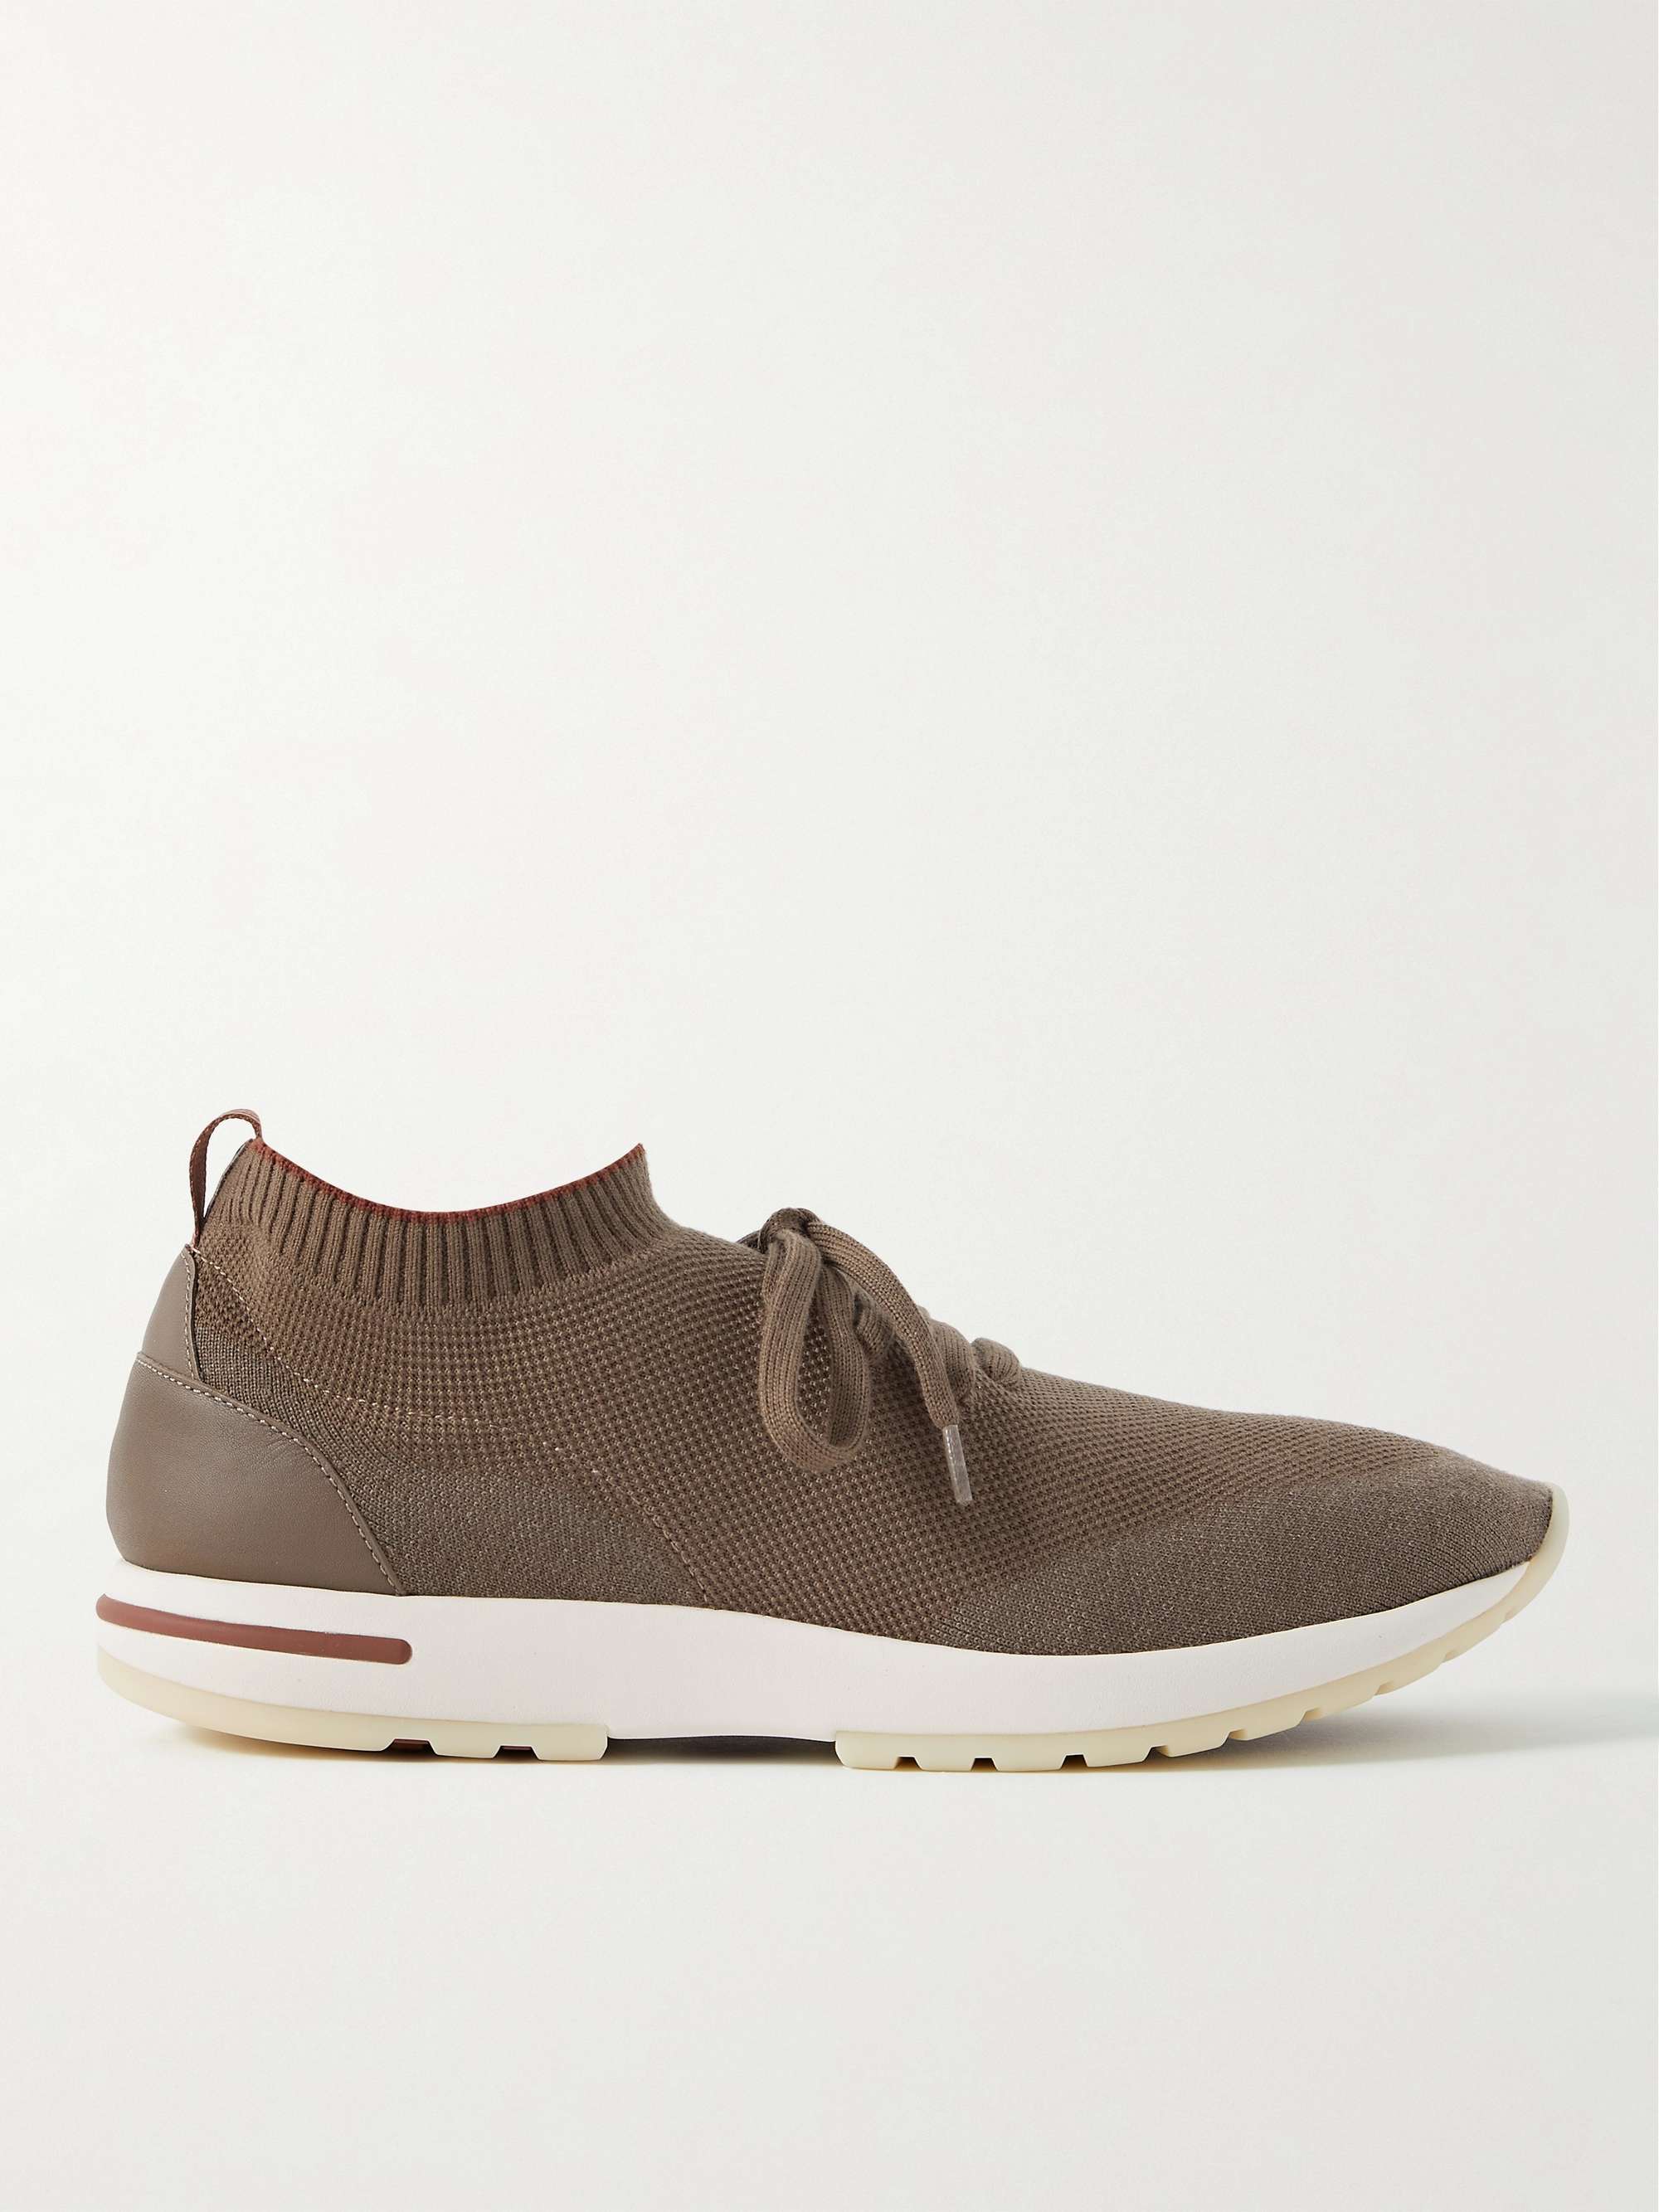 LORO PIANA 360 Flexy Walk Leather-Trimmed Knitted Wool Sneakers for Men |  MR PORTER